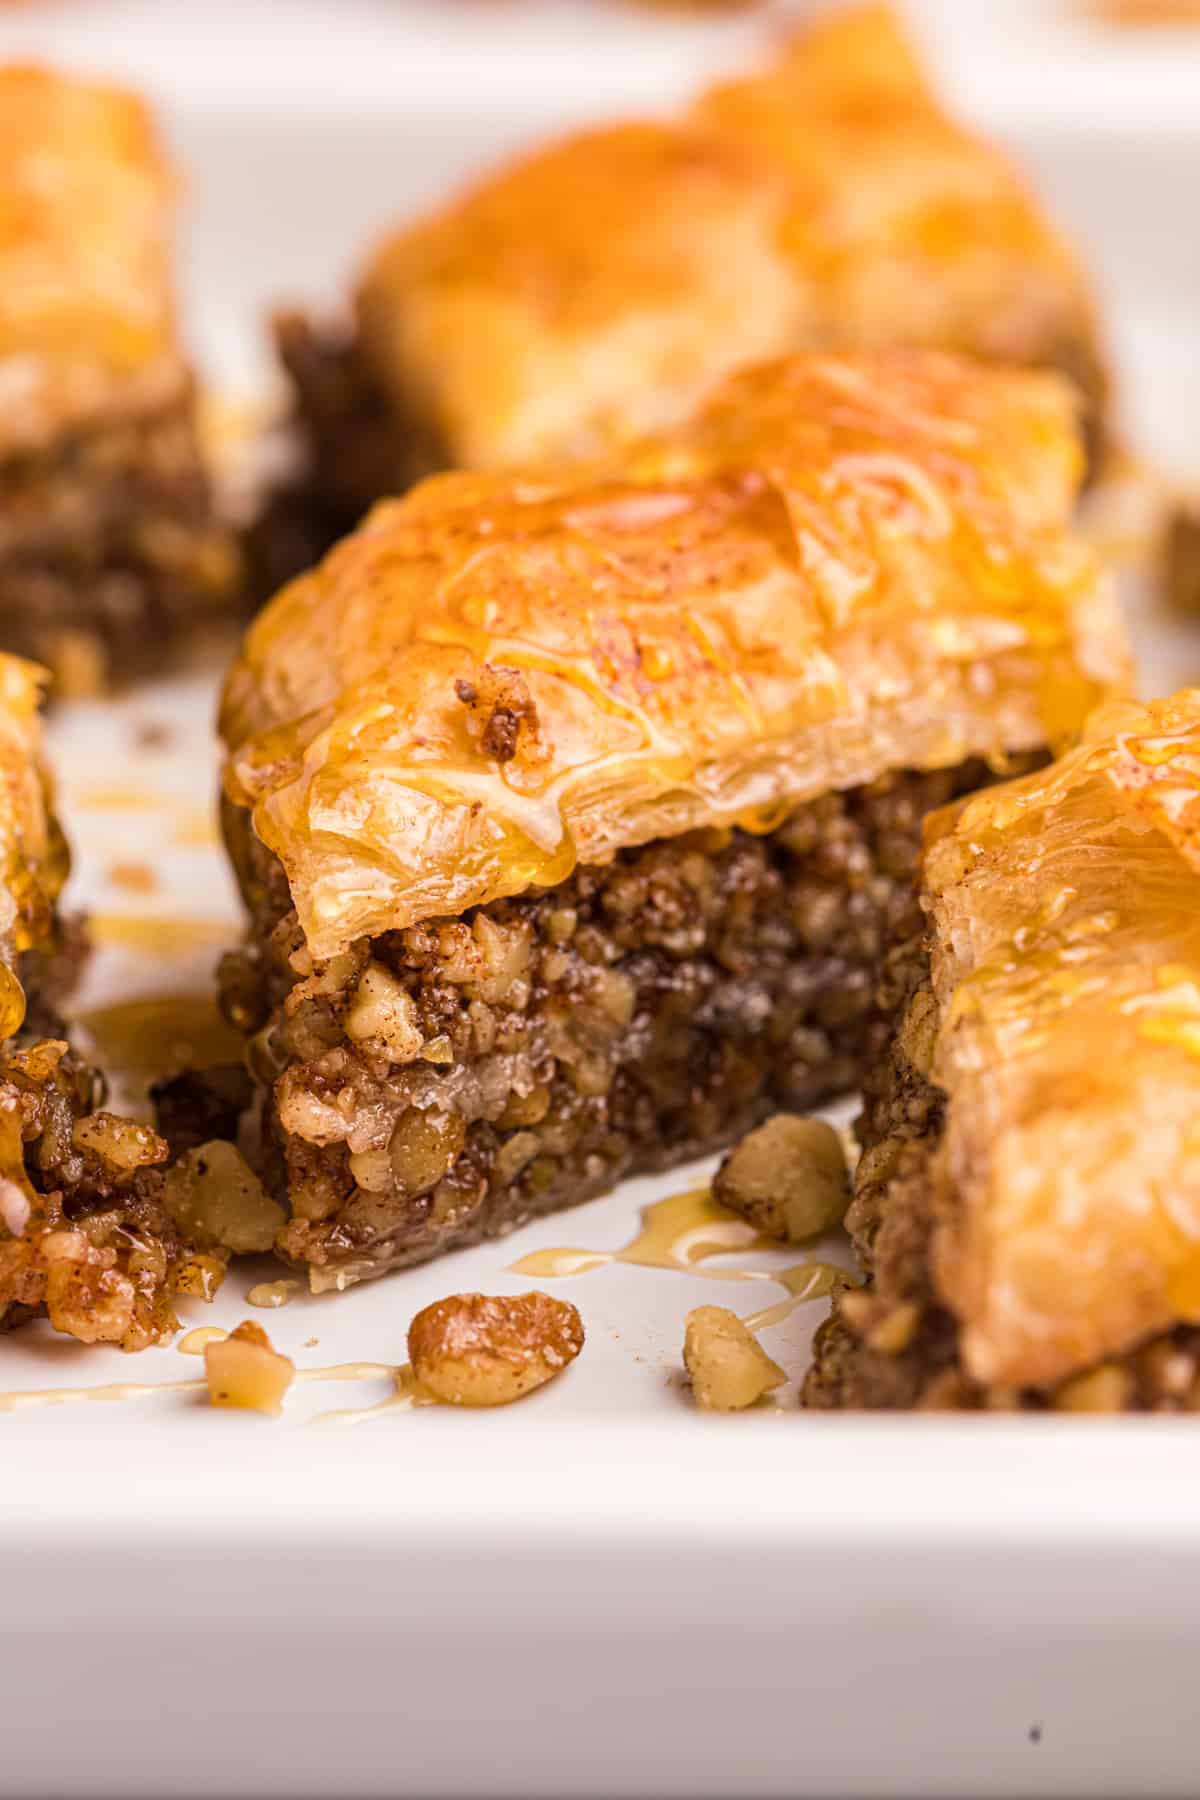 Several pieces of baklava are placed on a white plate.